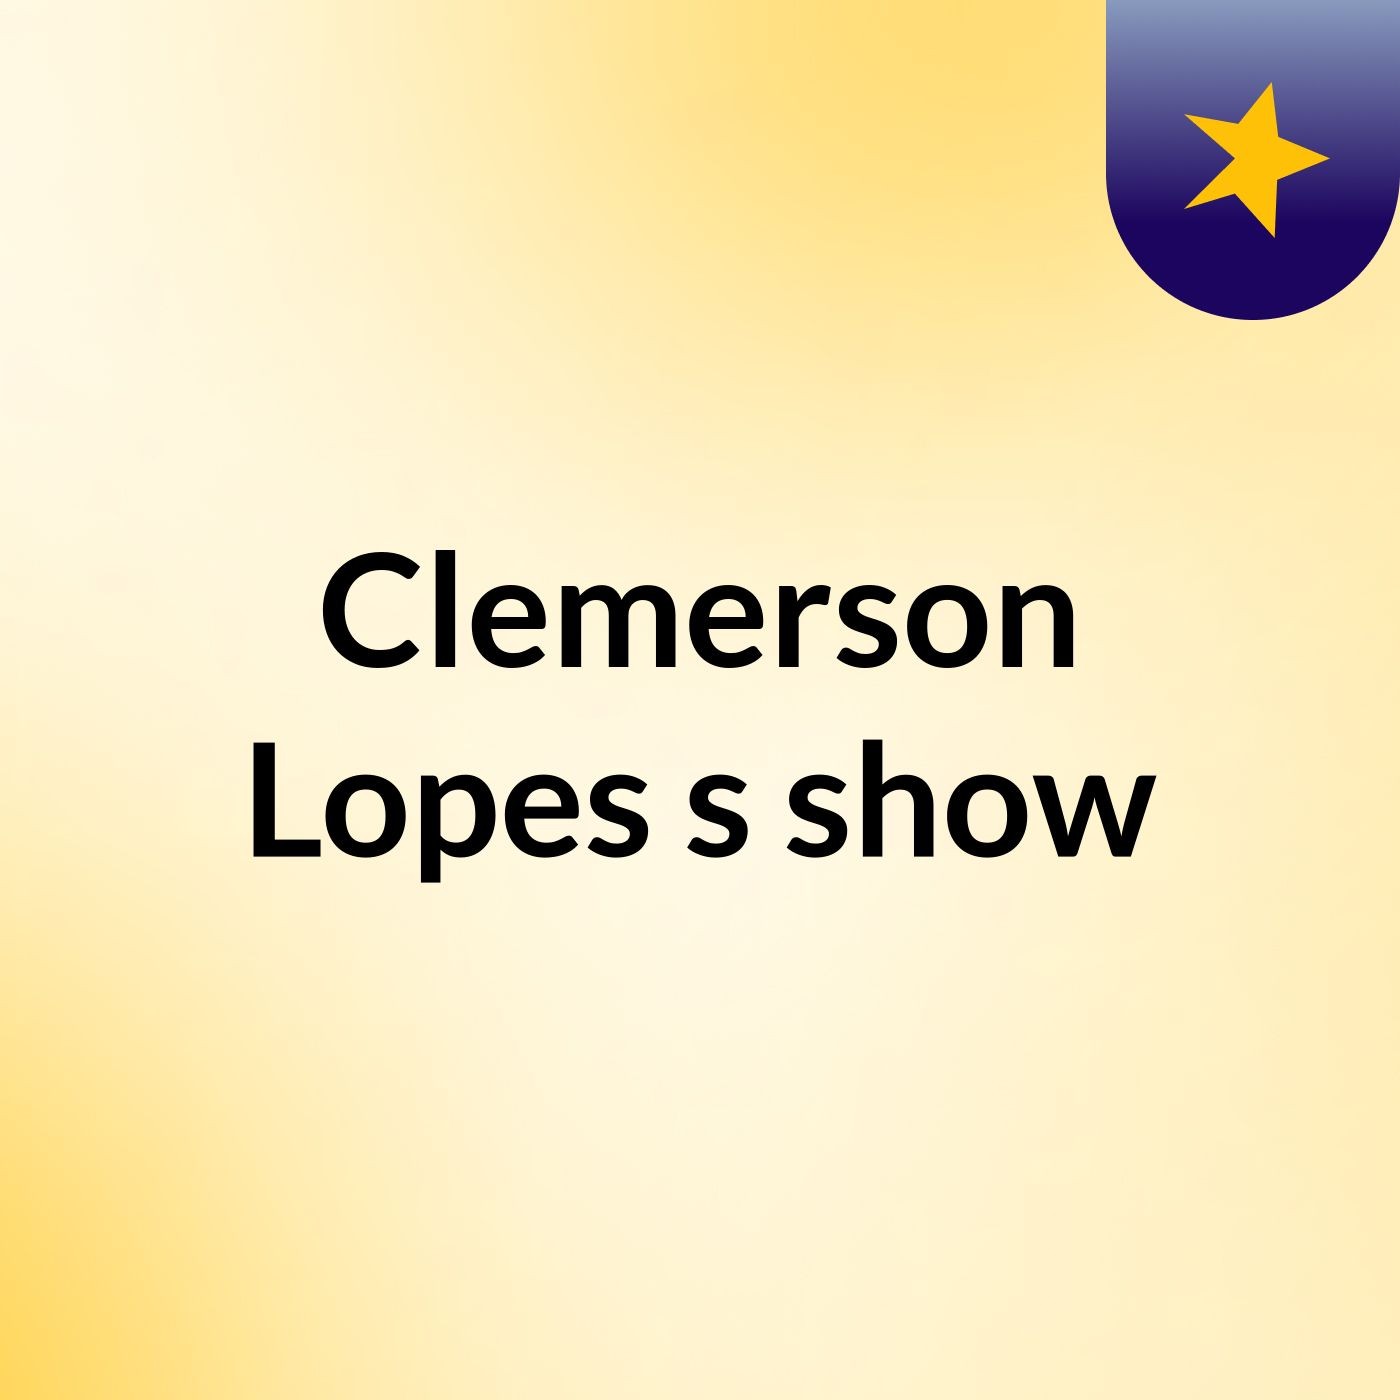 Clemerson Lopes's show